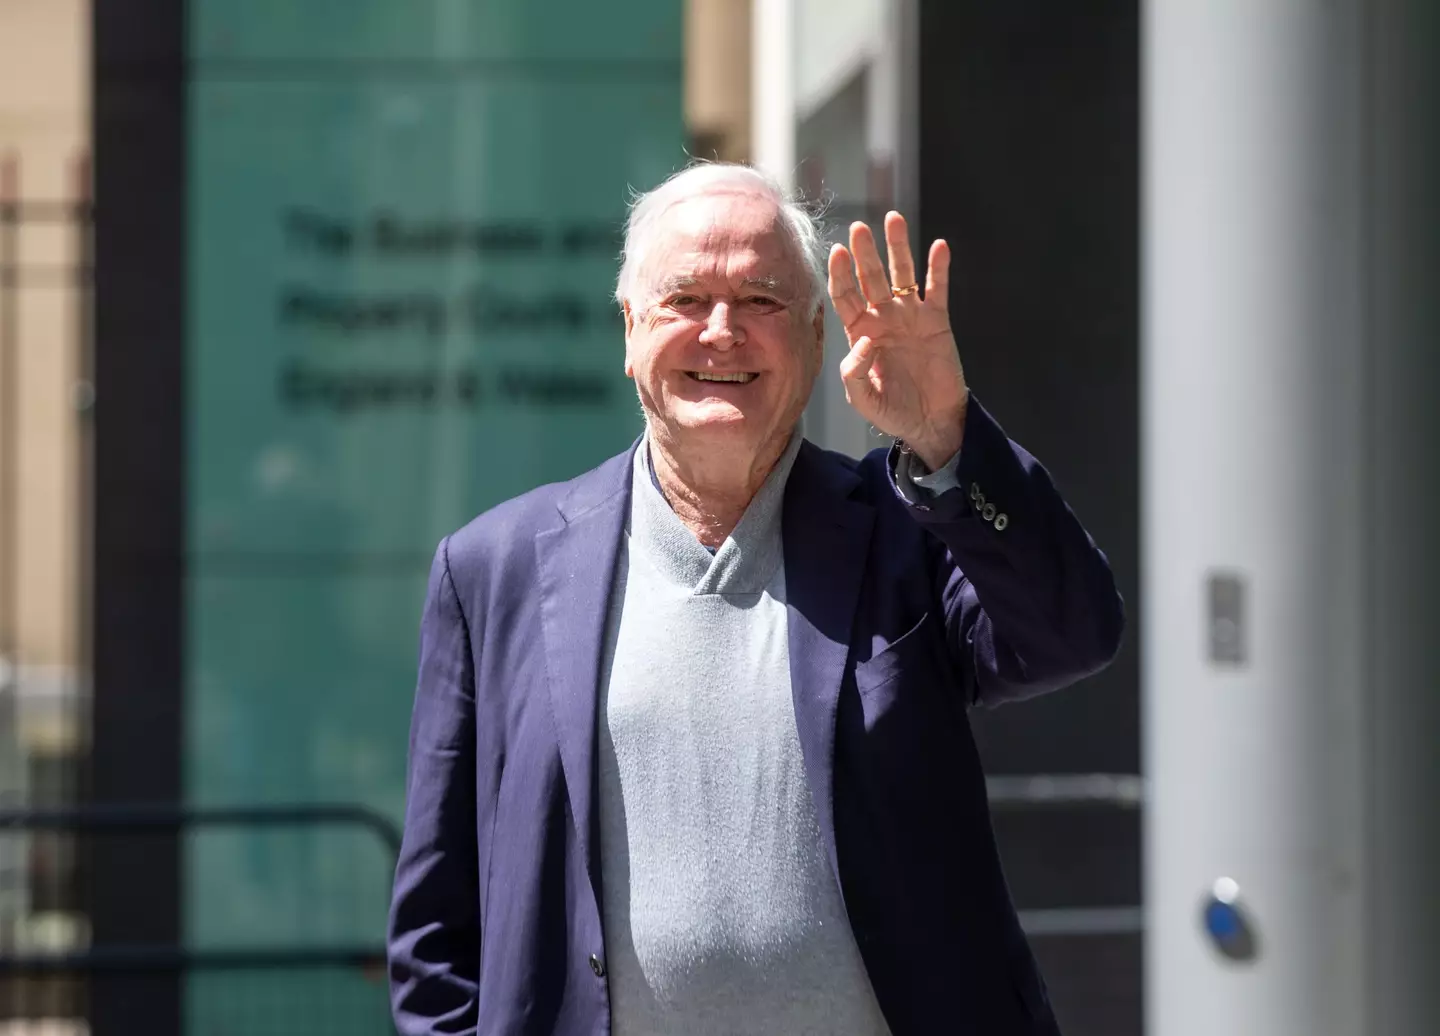 John Cleese is known for his outspoken views on cancel culture.